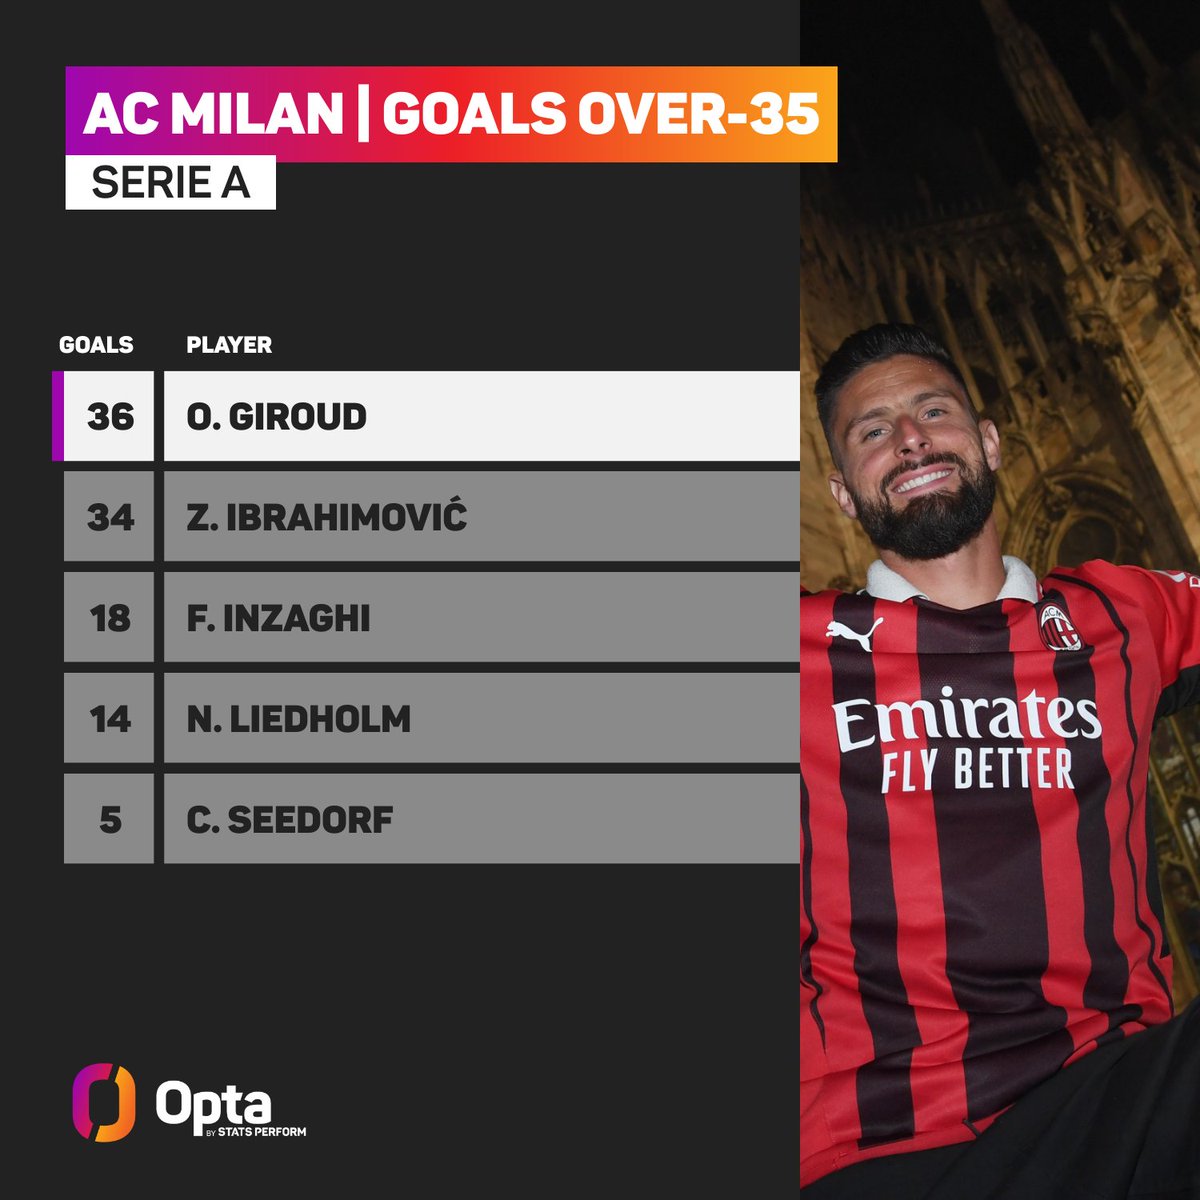 36 – Goals from AC Milan players in #SerieA after turning 35: 1. @_OlivierGiroud_ 36 2. Zlatan Ibrahimović 34 3. Filippo Inzaghi 18 4. Nils Liedholm 14 5. Clarence Seedorf 5 Sparrowhawk.